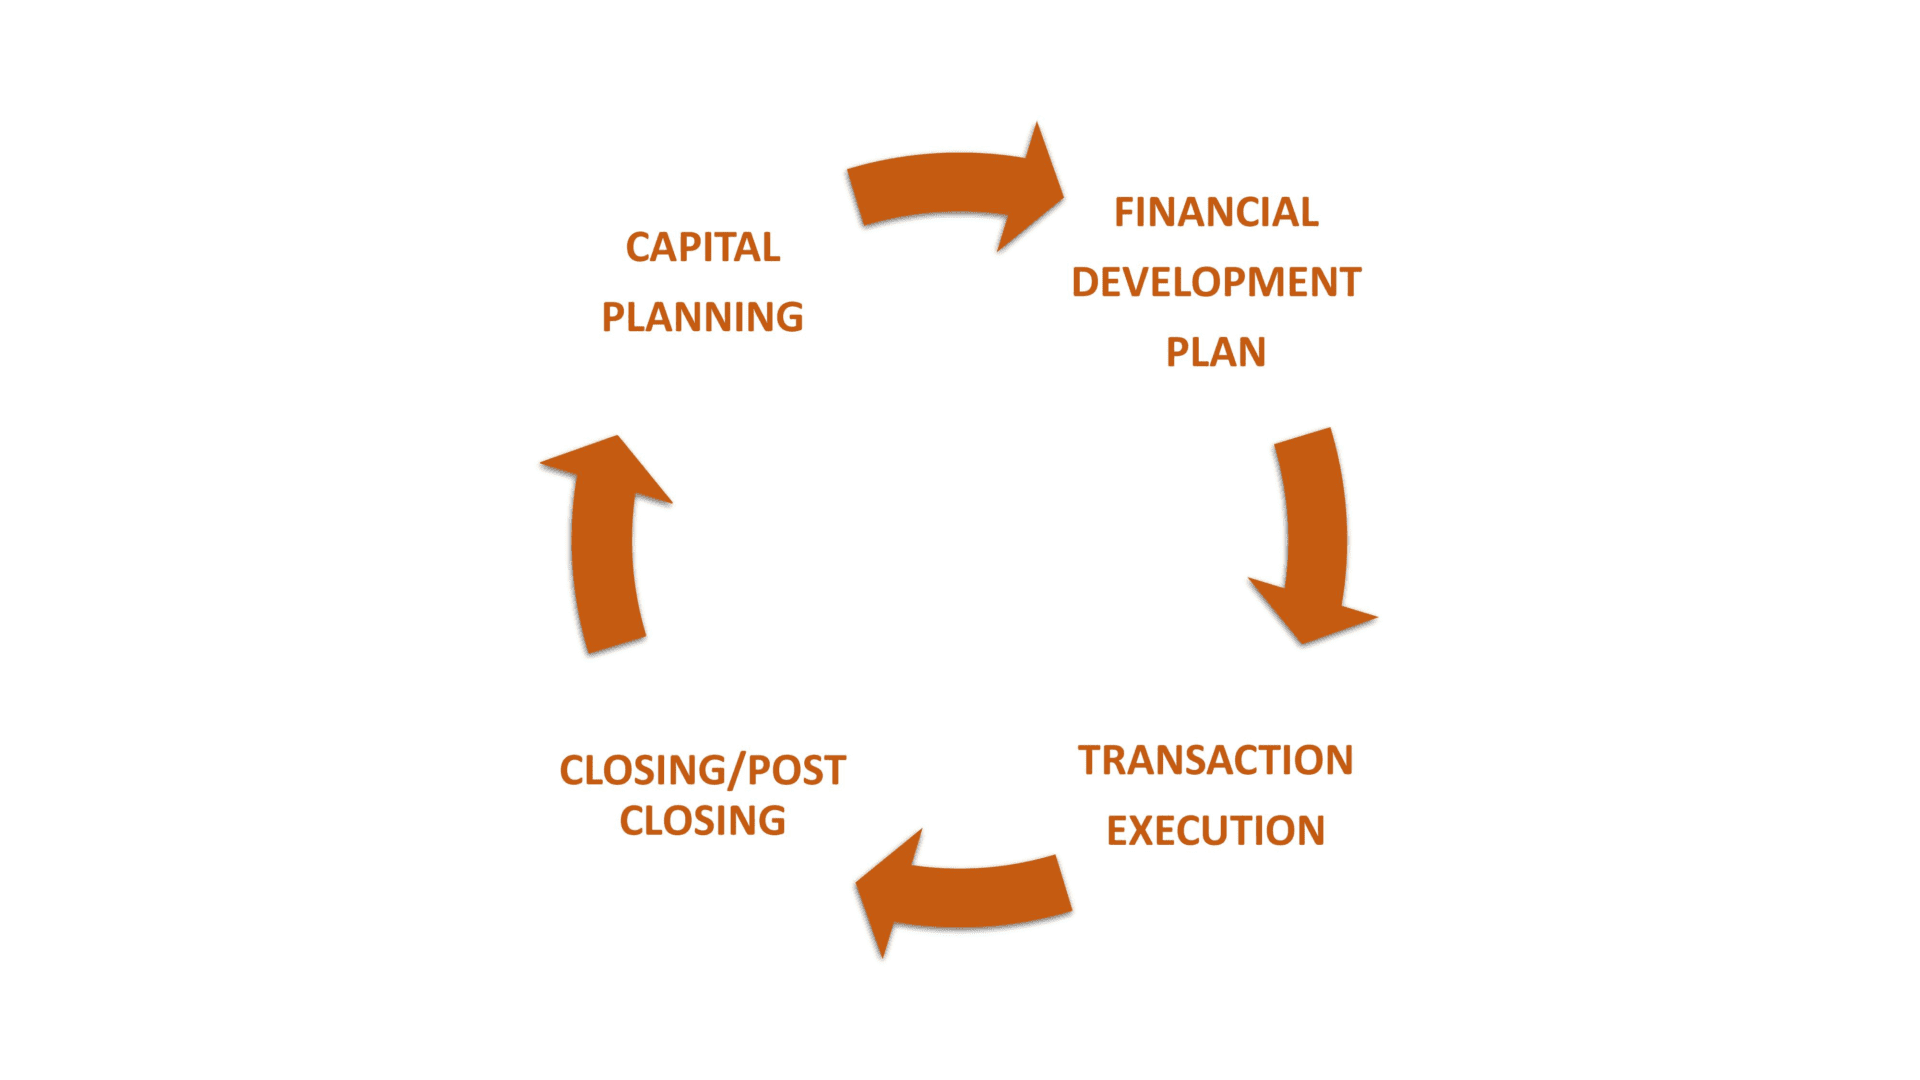 A circular diagram of the cycle of capital planning.